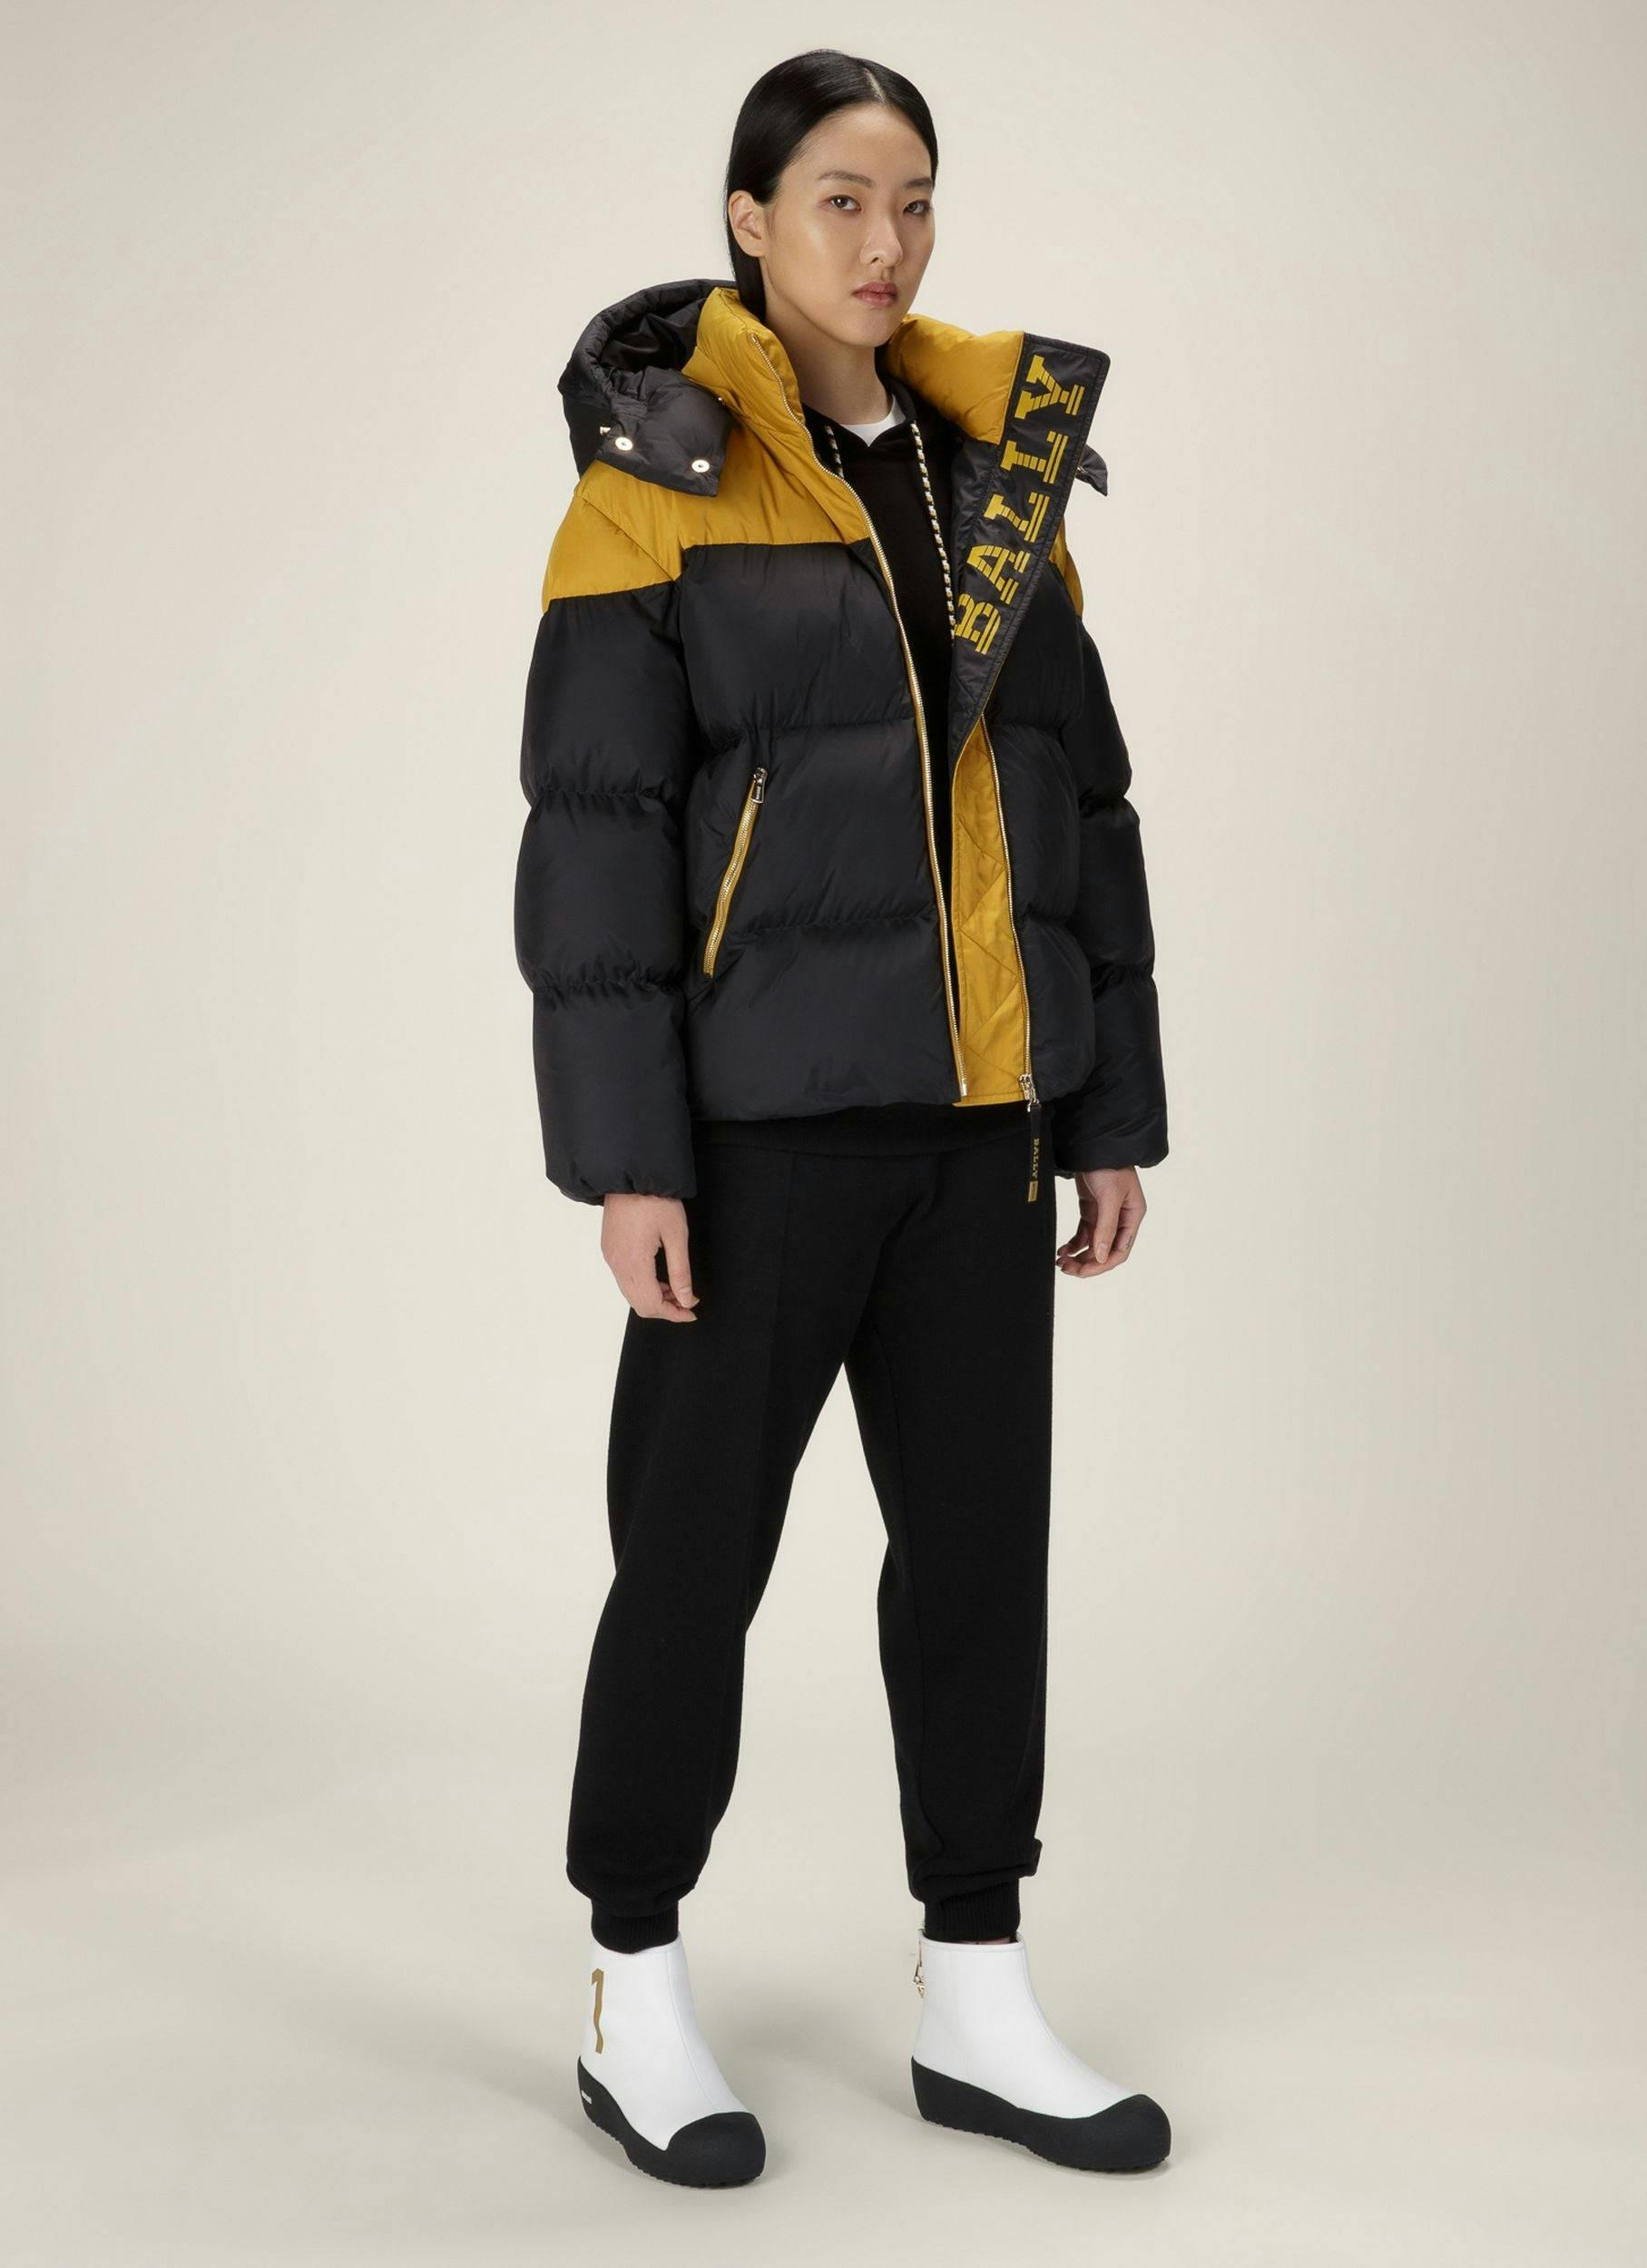 WINTER GOLD Outerwear In Black & Yellow         - Femme - Bally - 05